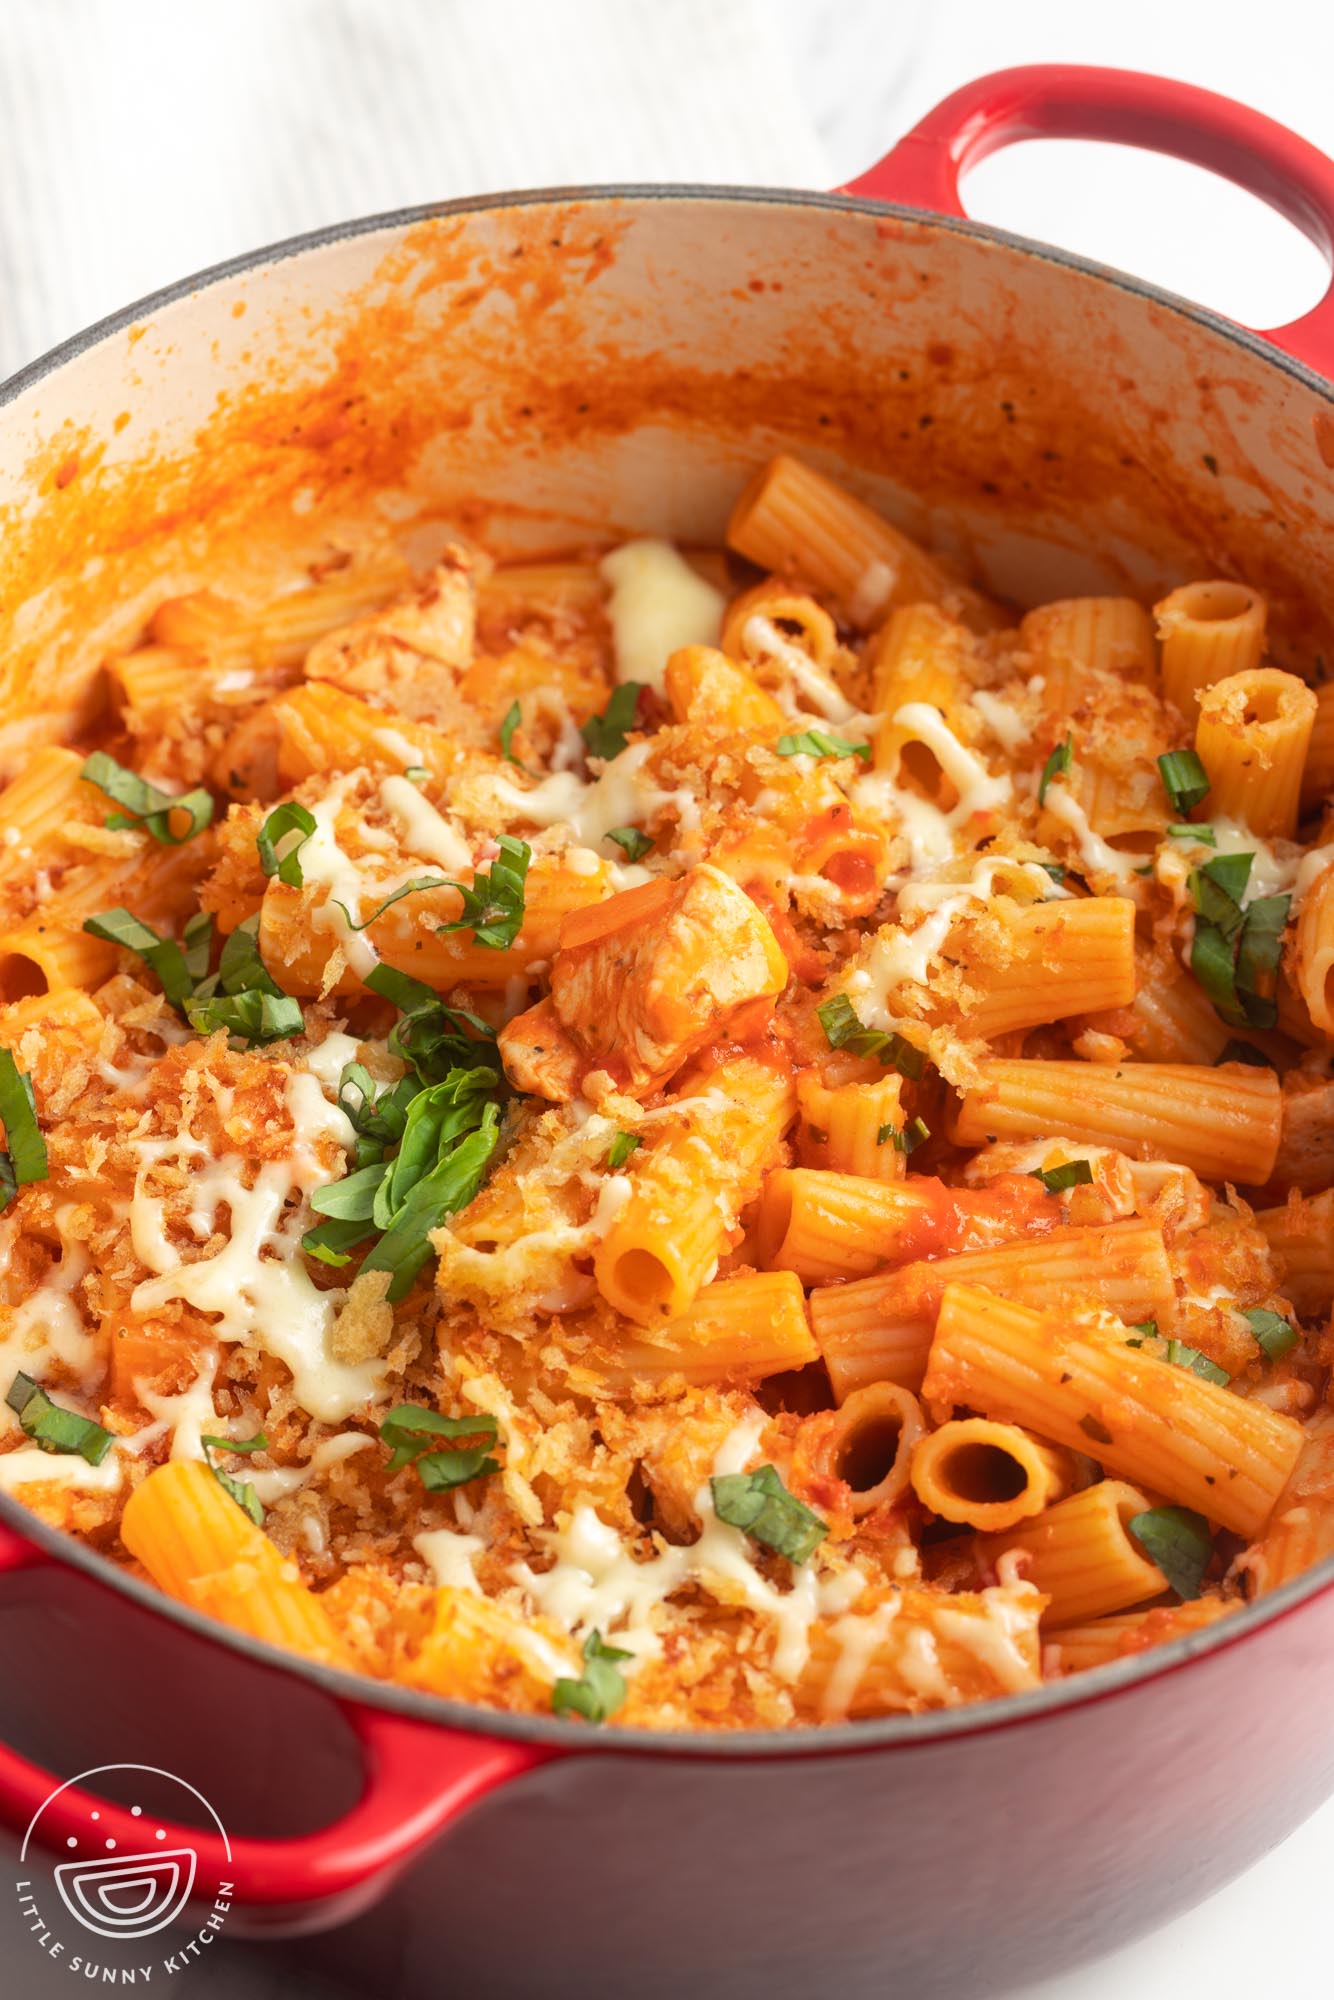 a large dutch oven filled with rigatoni and chicken in a tomato sauce, topped with cheese and breadcrumbs